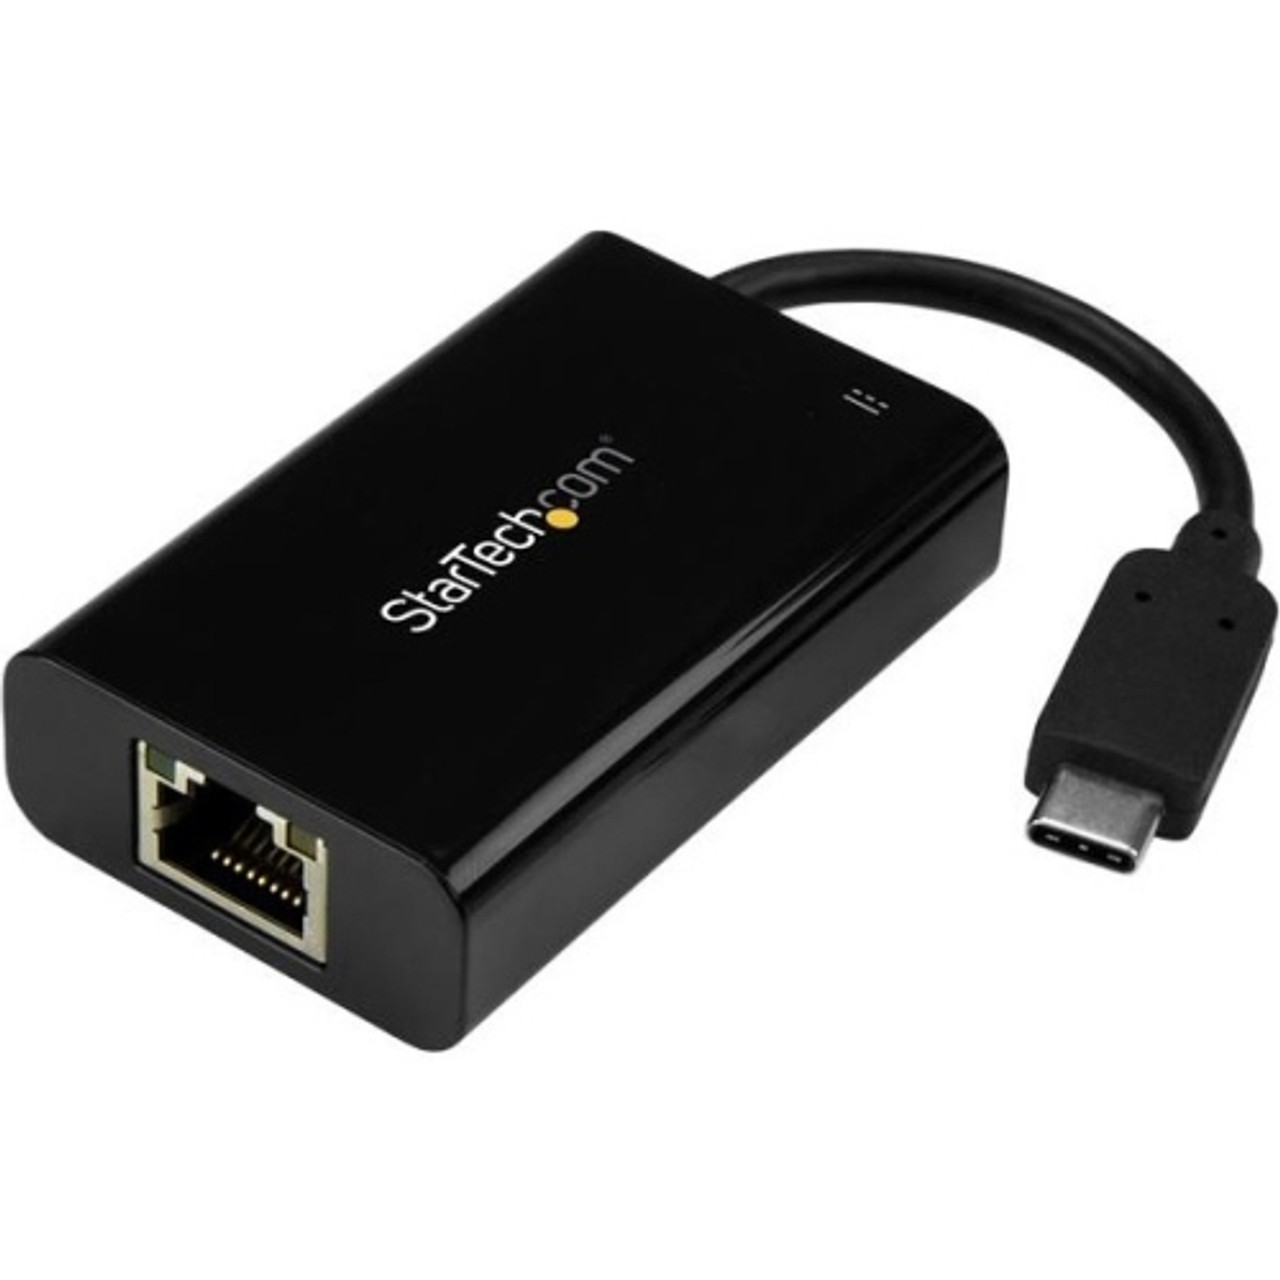 US1GC30PD StarTech.com USB-C to Ethernet Adapter with PD Charging USB-C Gigabit Ethernet Network Adapter Power Delivery 2.0 USB 3.0 1 Port(s) 1 Twisted Pair